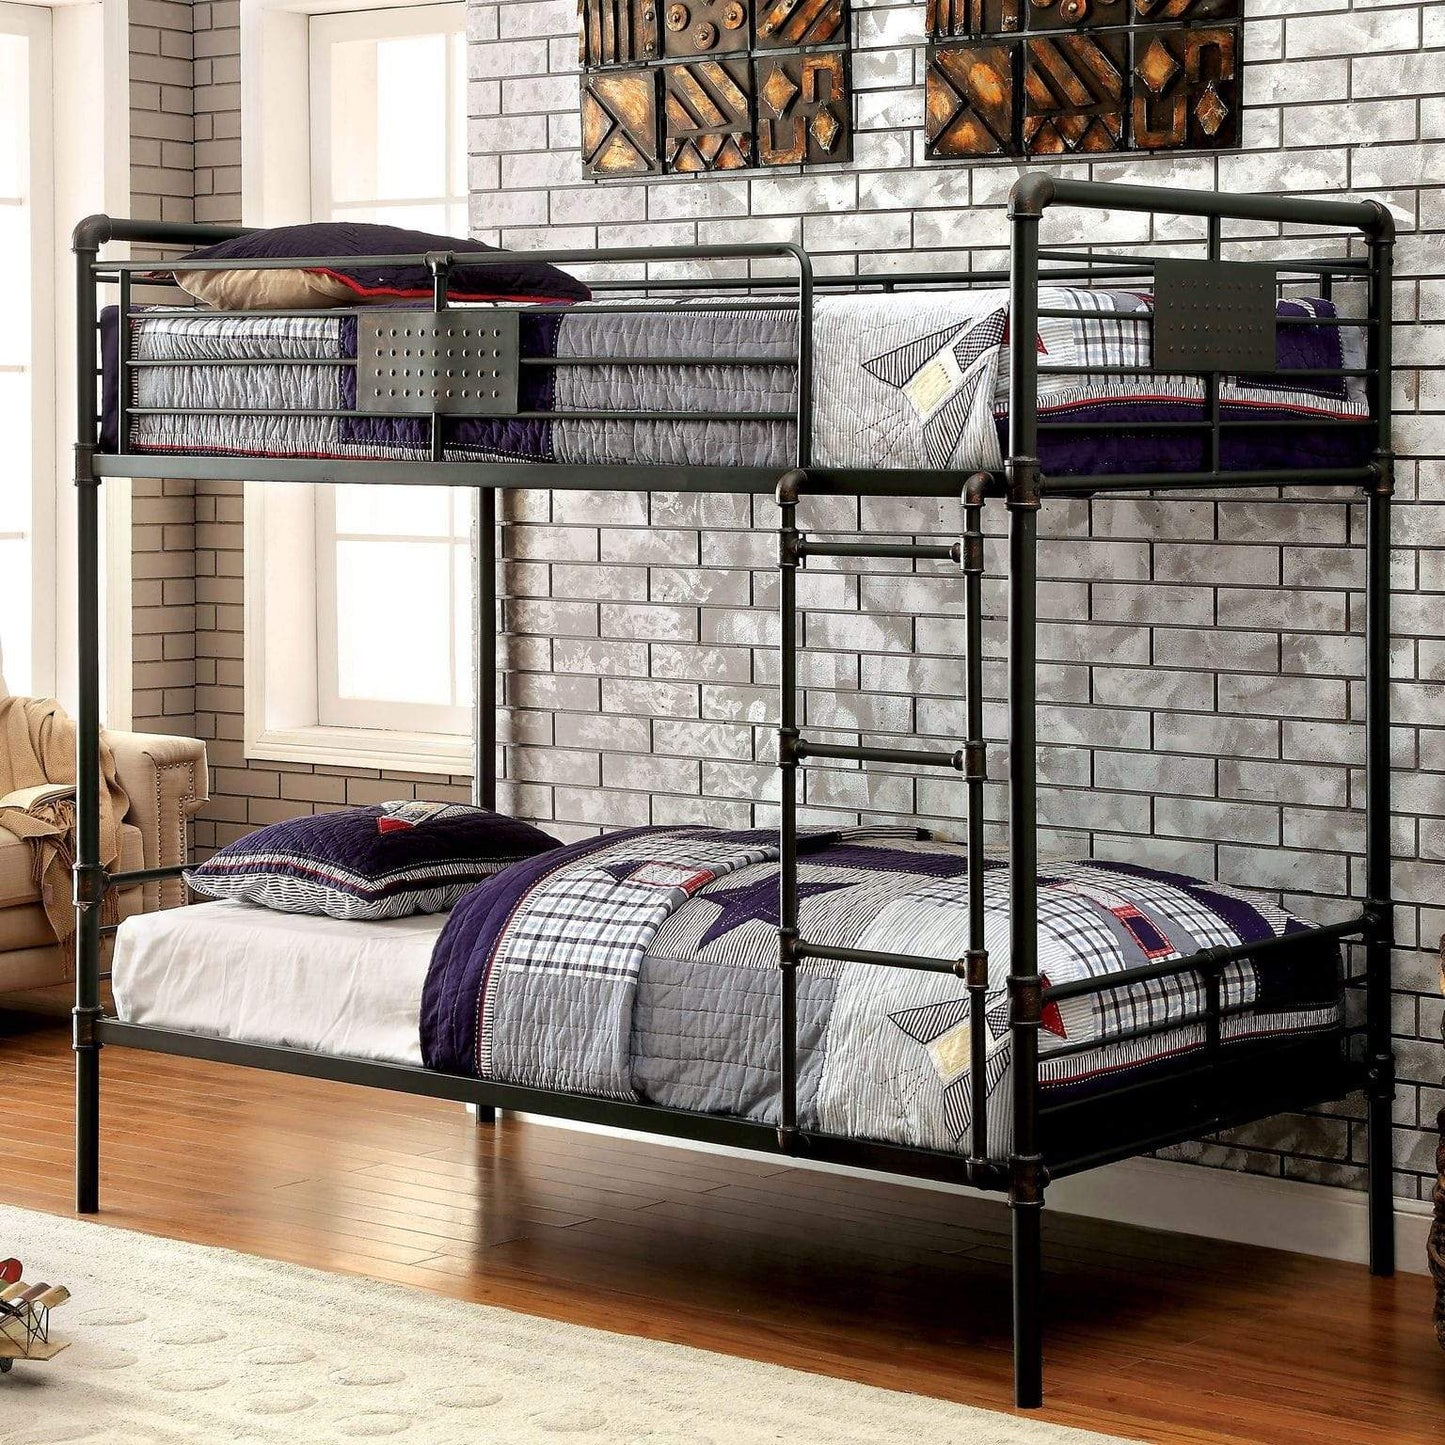 Furniture of America bunk bed Byron Industrial twin/ twin Bunk Bed Byron Industrial Twin / Twin Bunk Bed